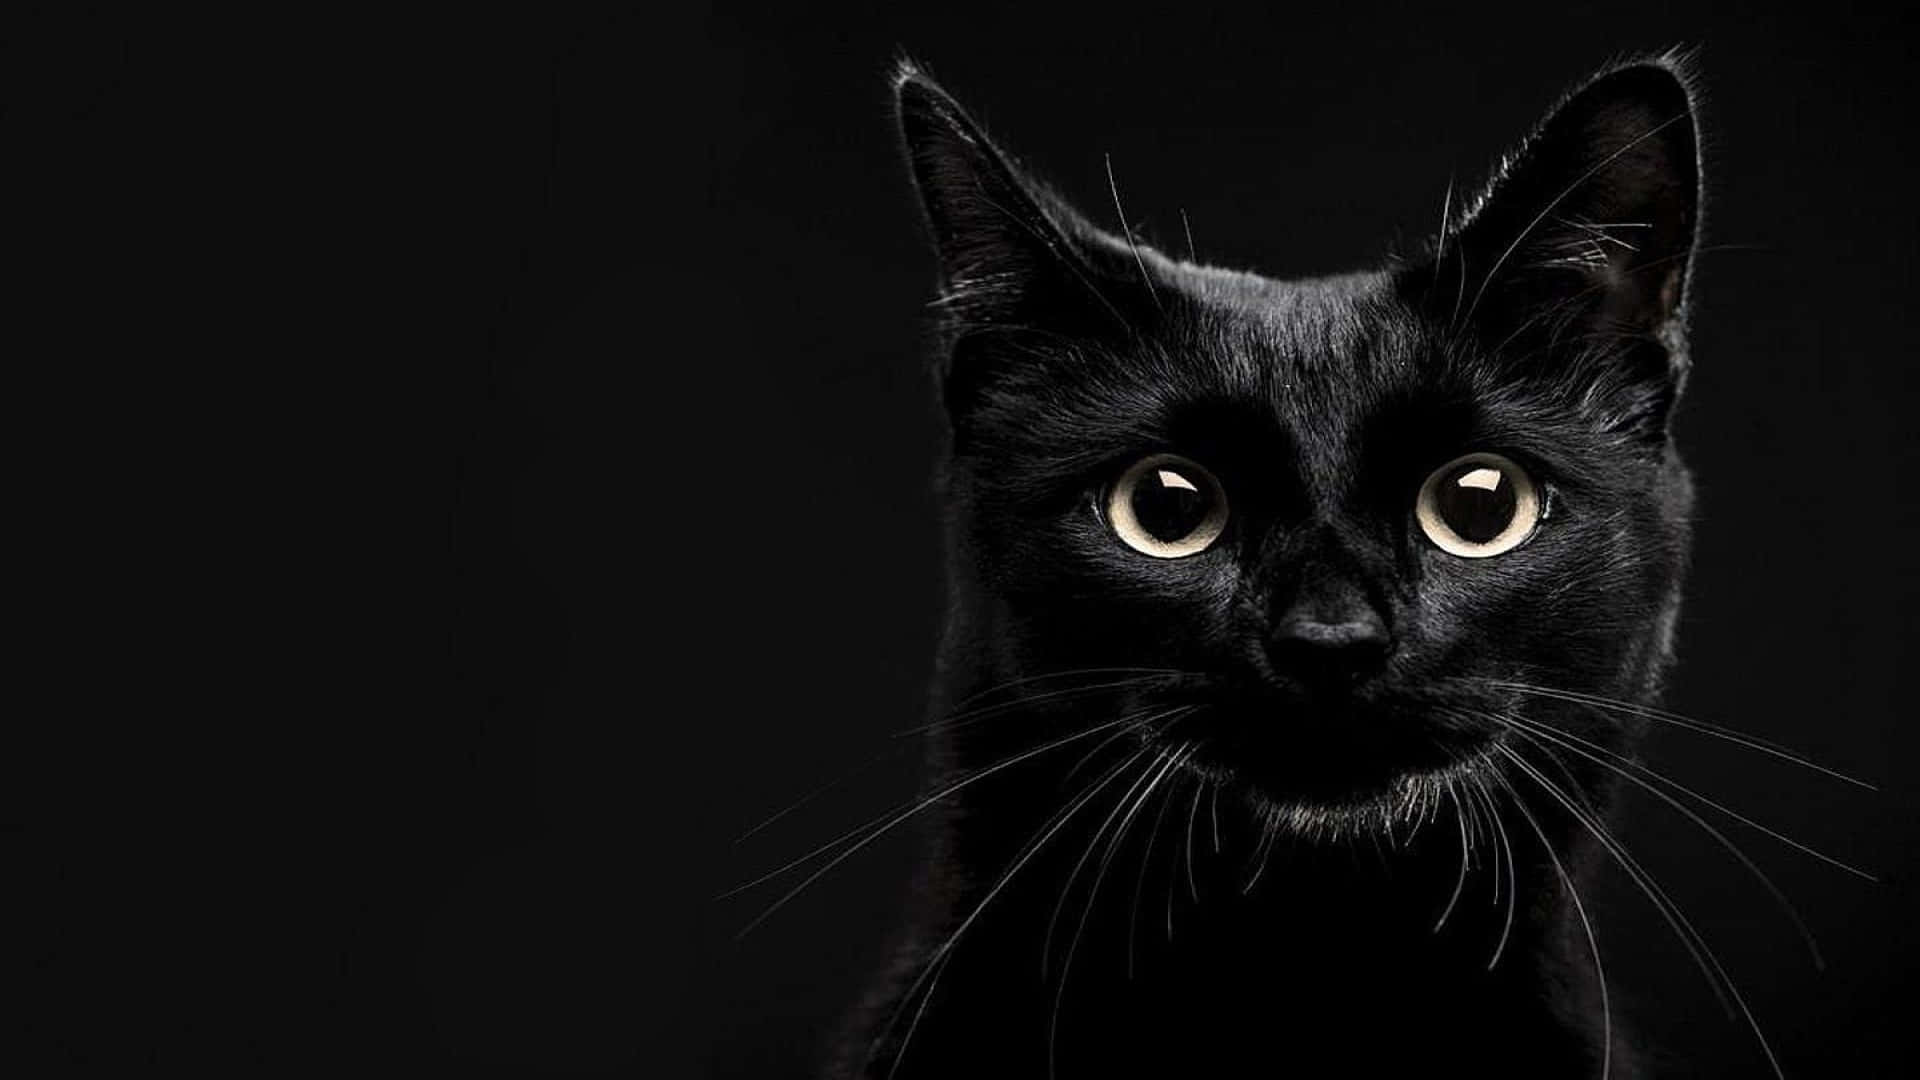 A Black Cat Is Staring At The Camera